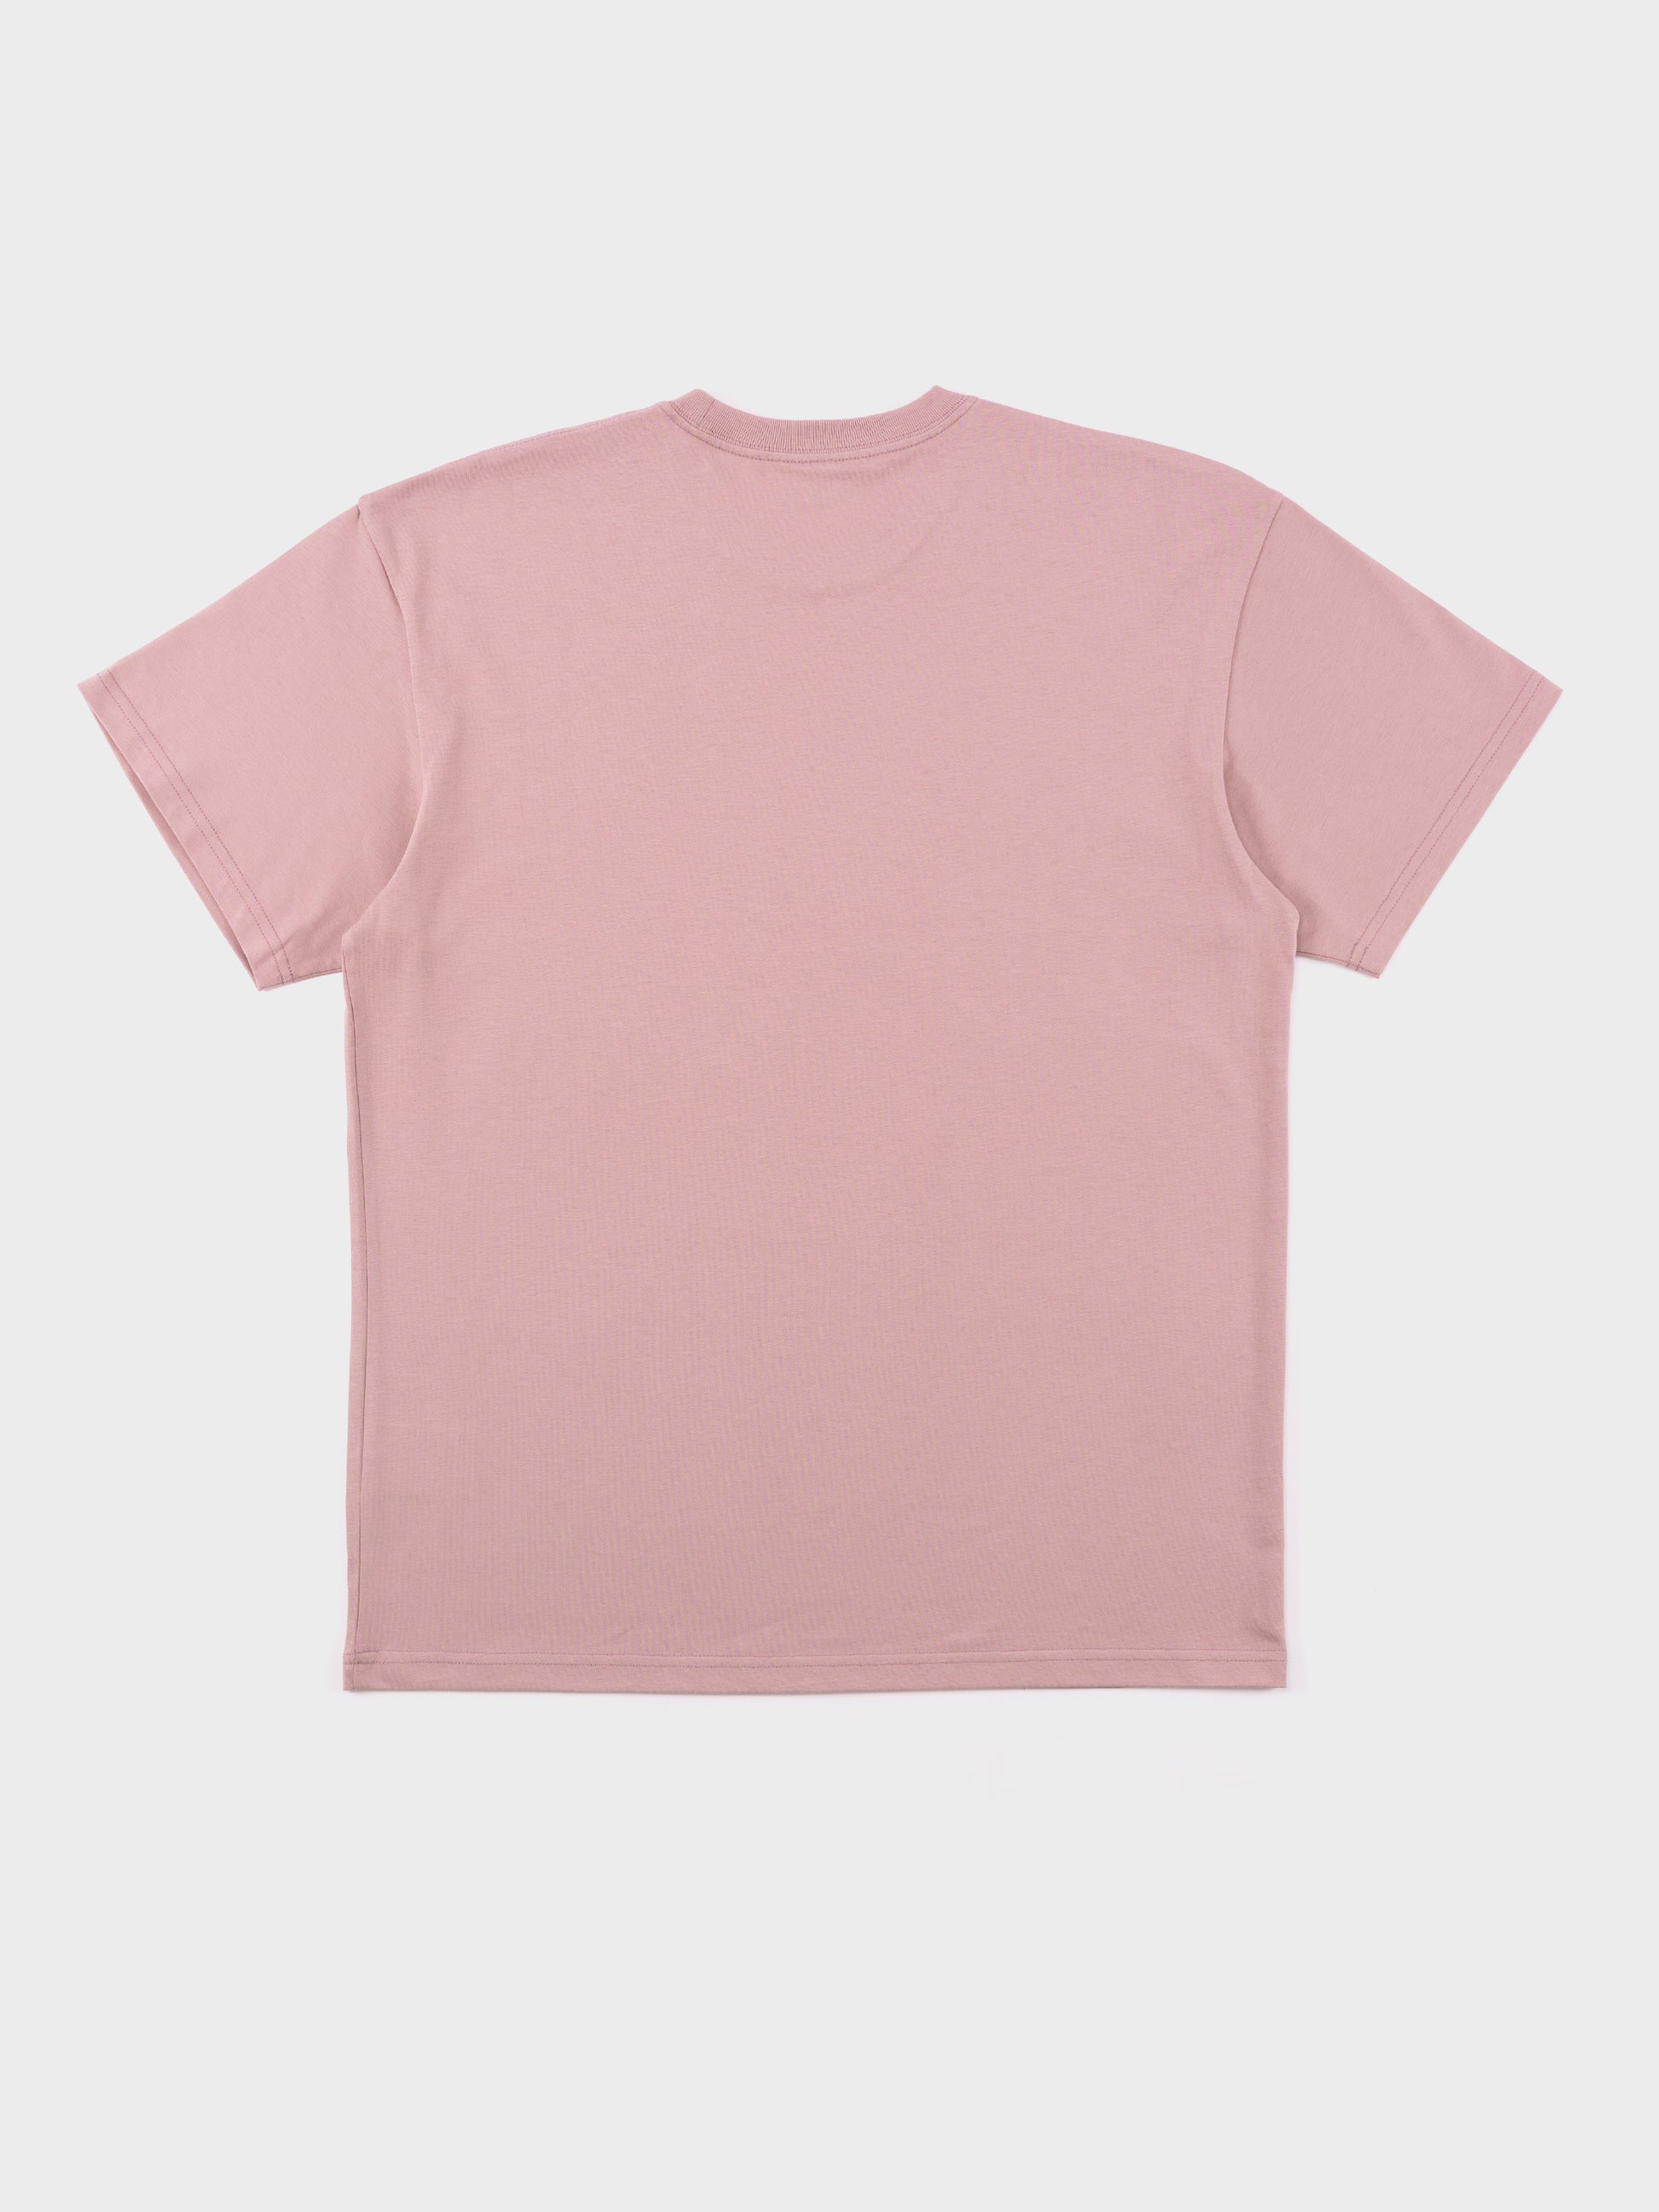 Carhartt SS Chase T Shirt - Glassy Pink/Gold